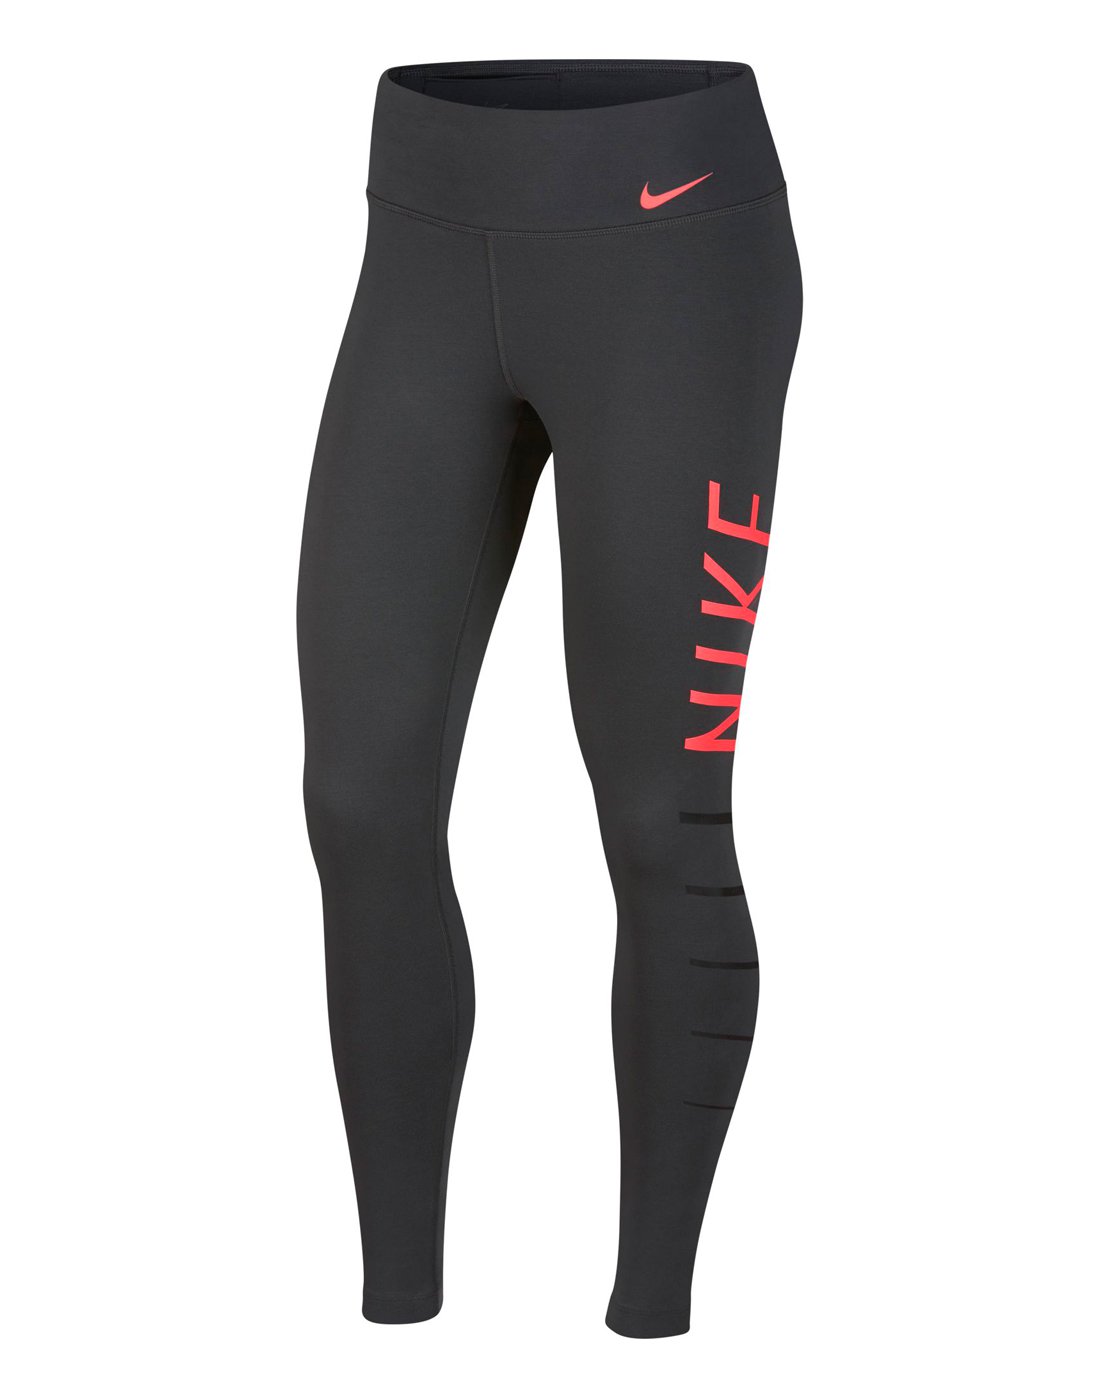 Women’s Nike Power Tights | Grey | Life Style Sports